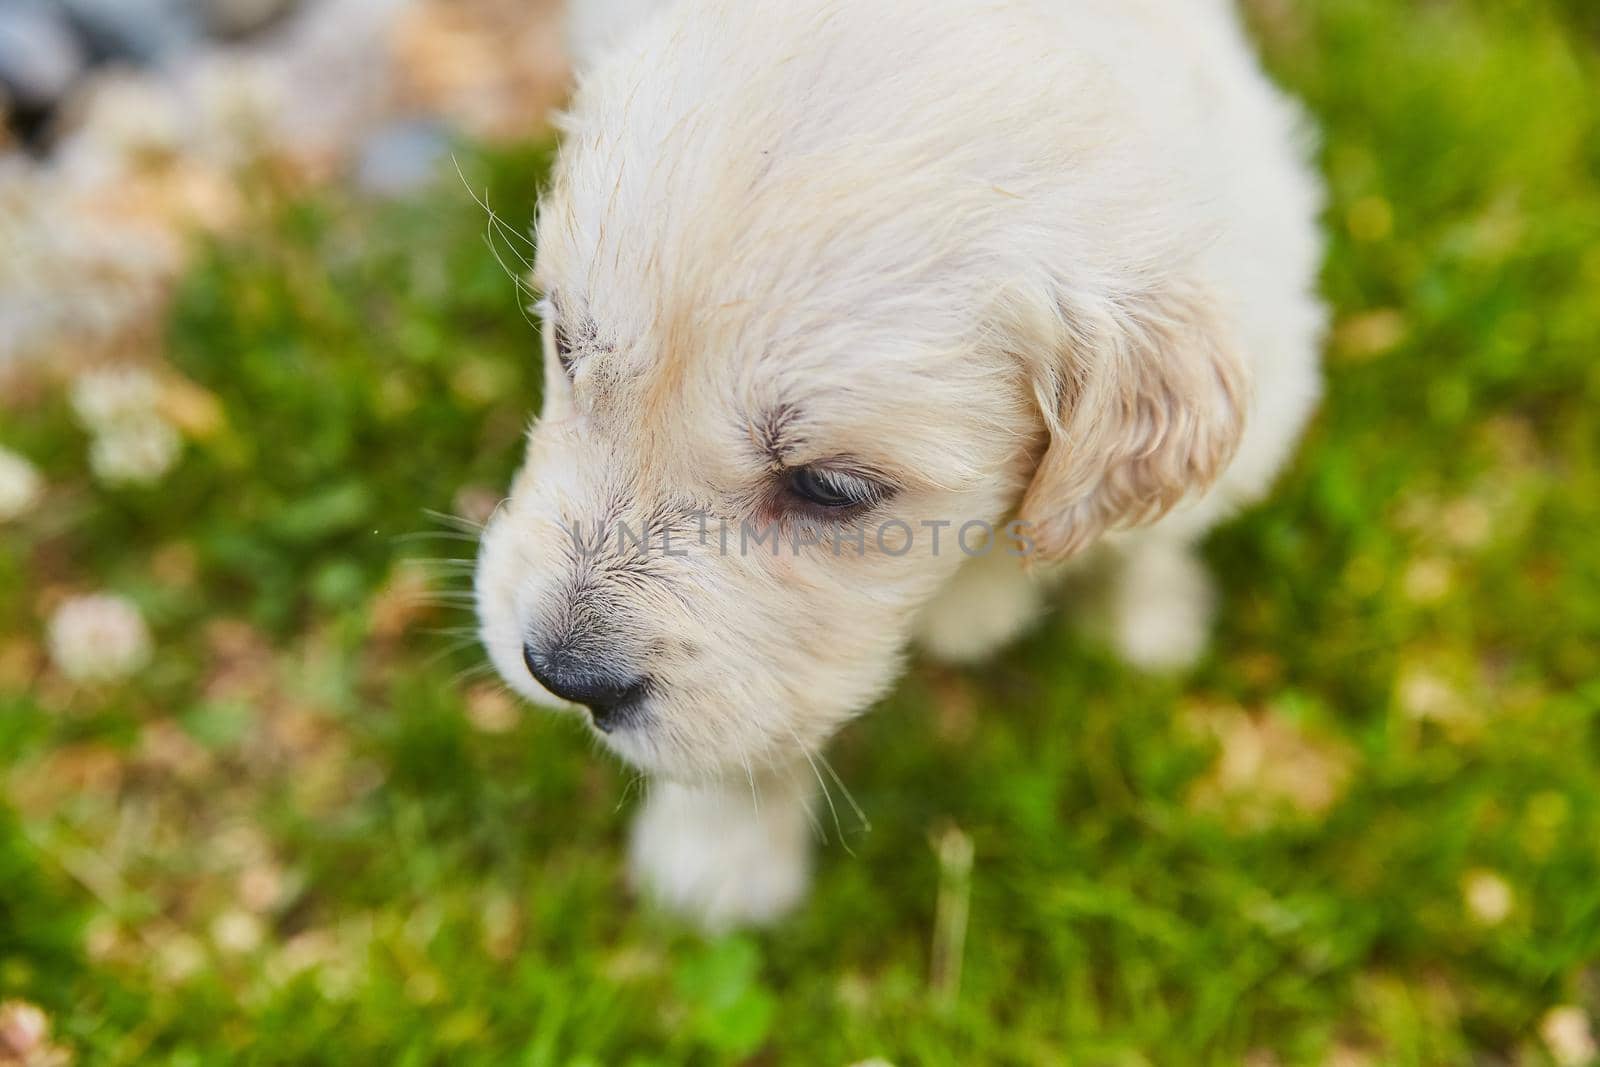 Image of Cute golden retriever from above in grass with detail of face